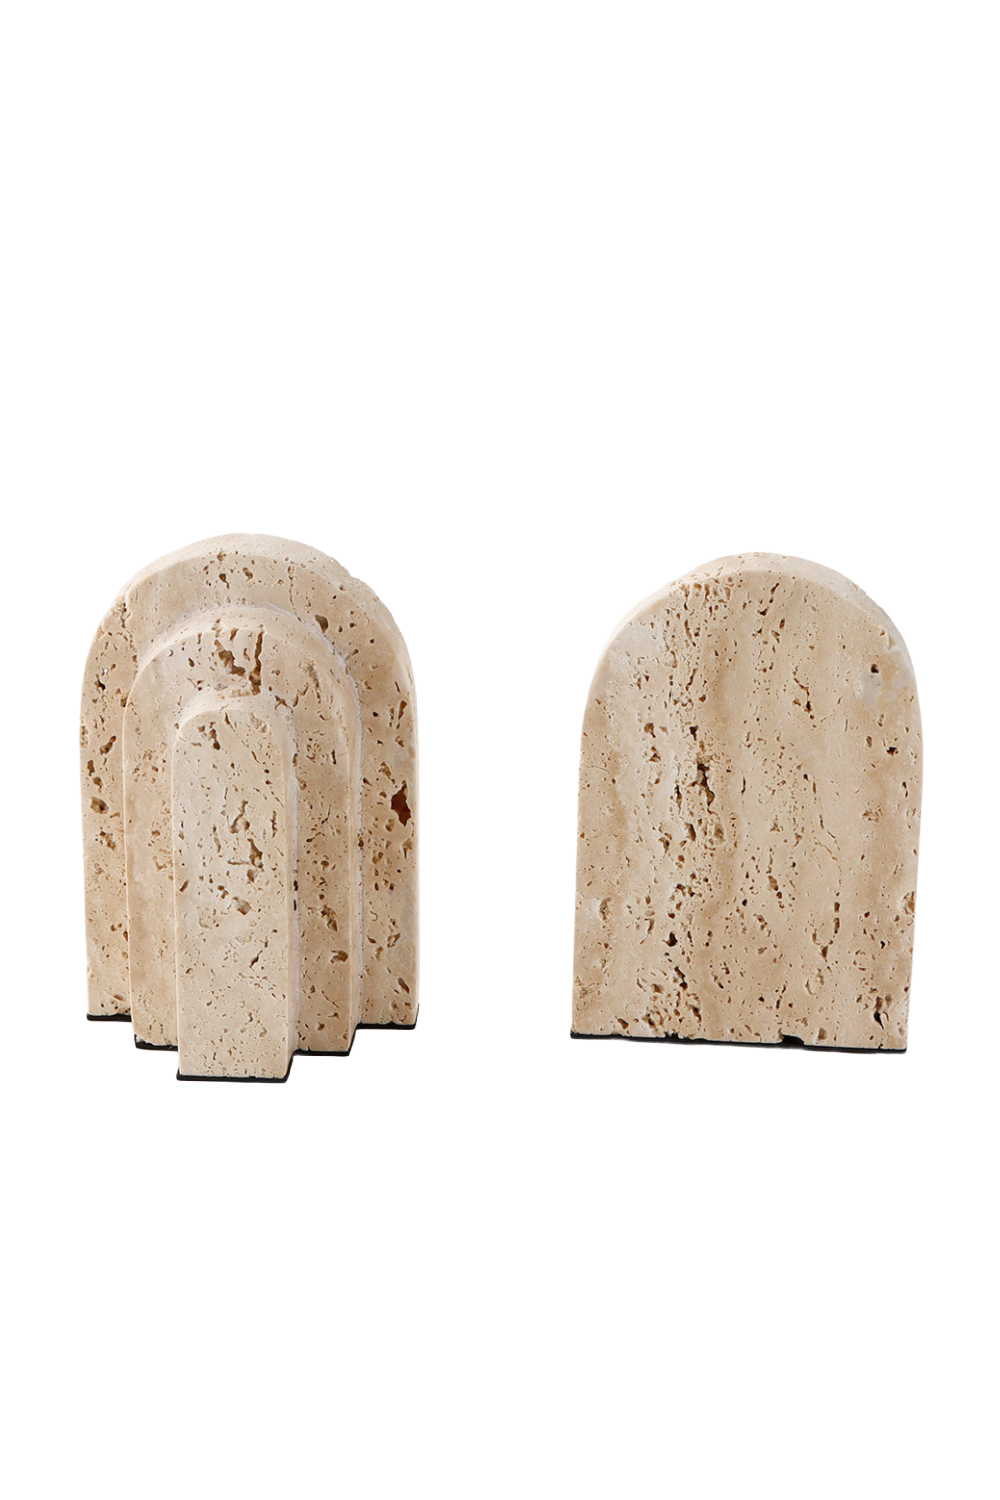 Beige Marble Bookends | Liang & Eimil Empire | Oroa.com